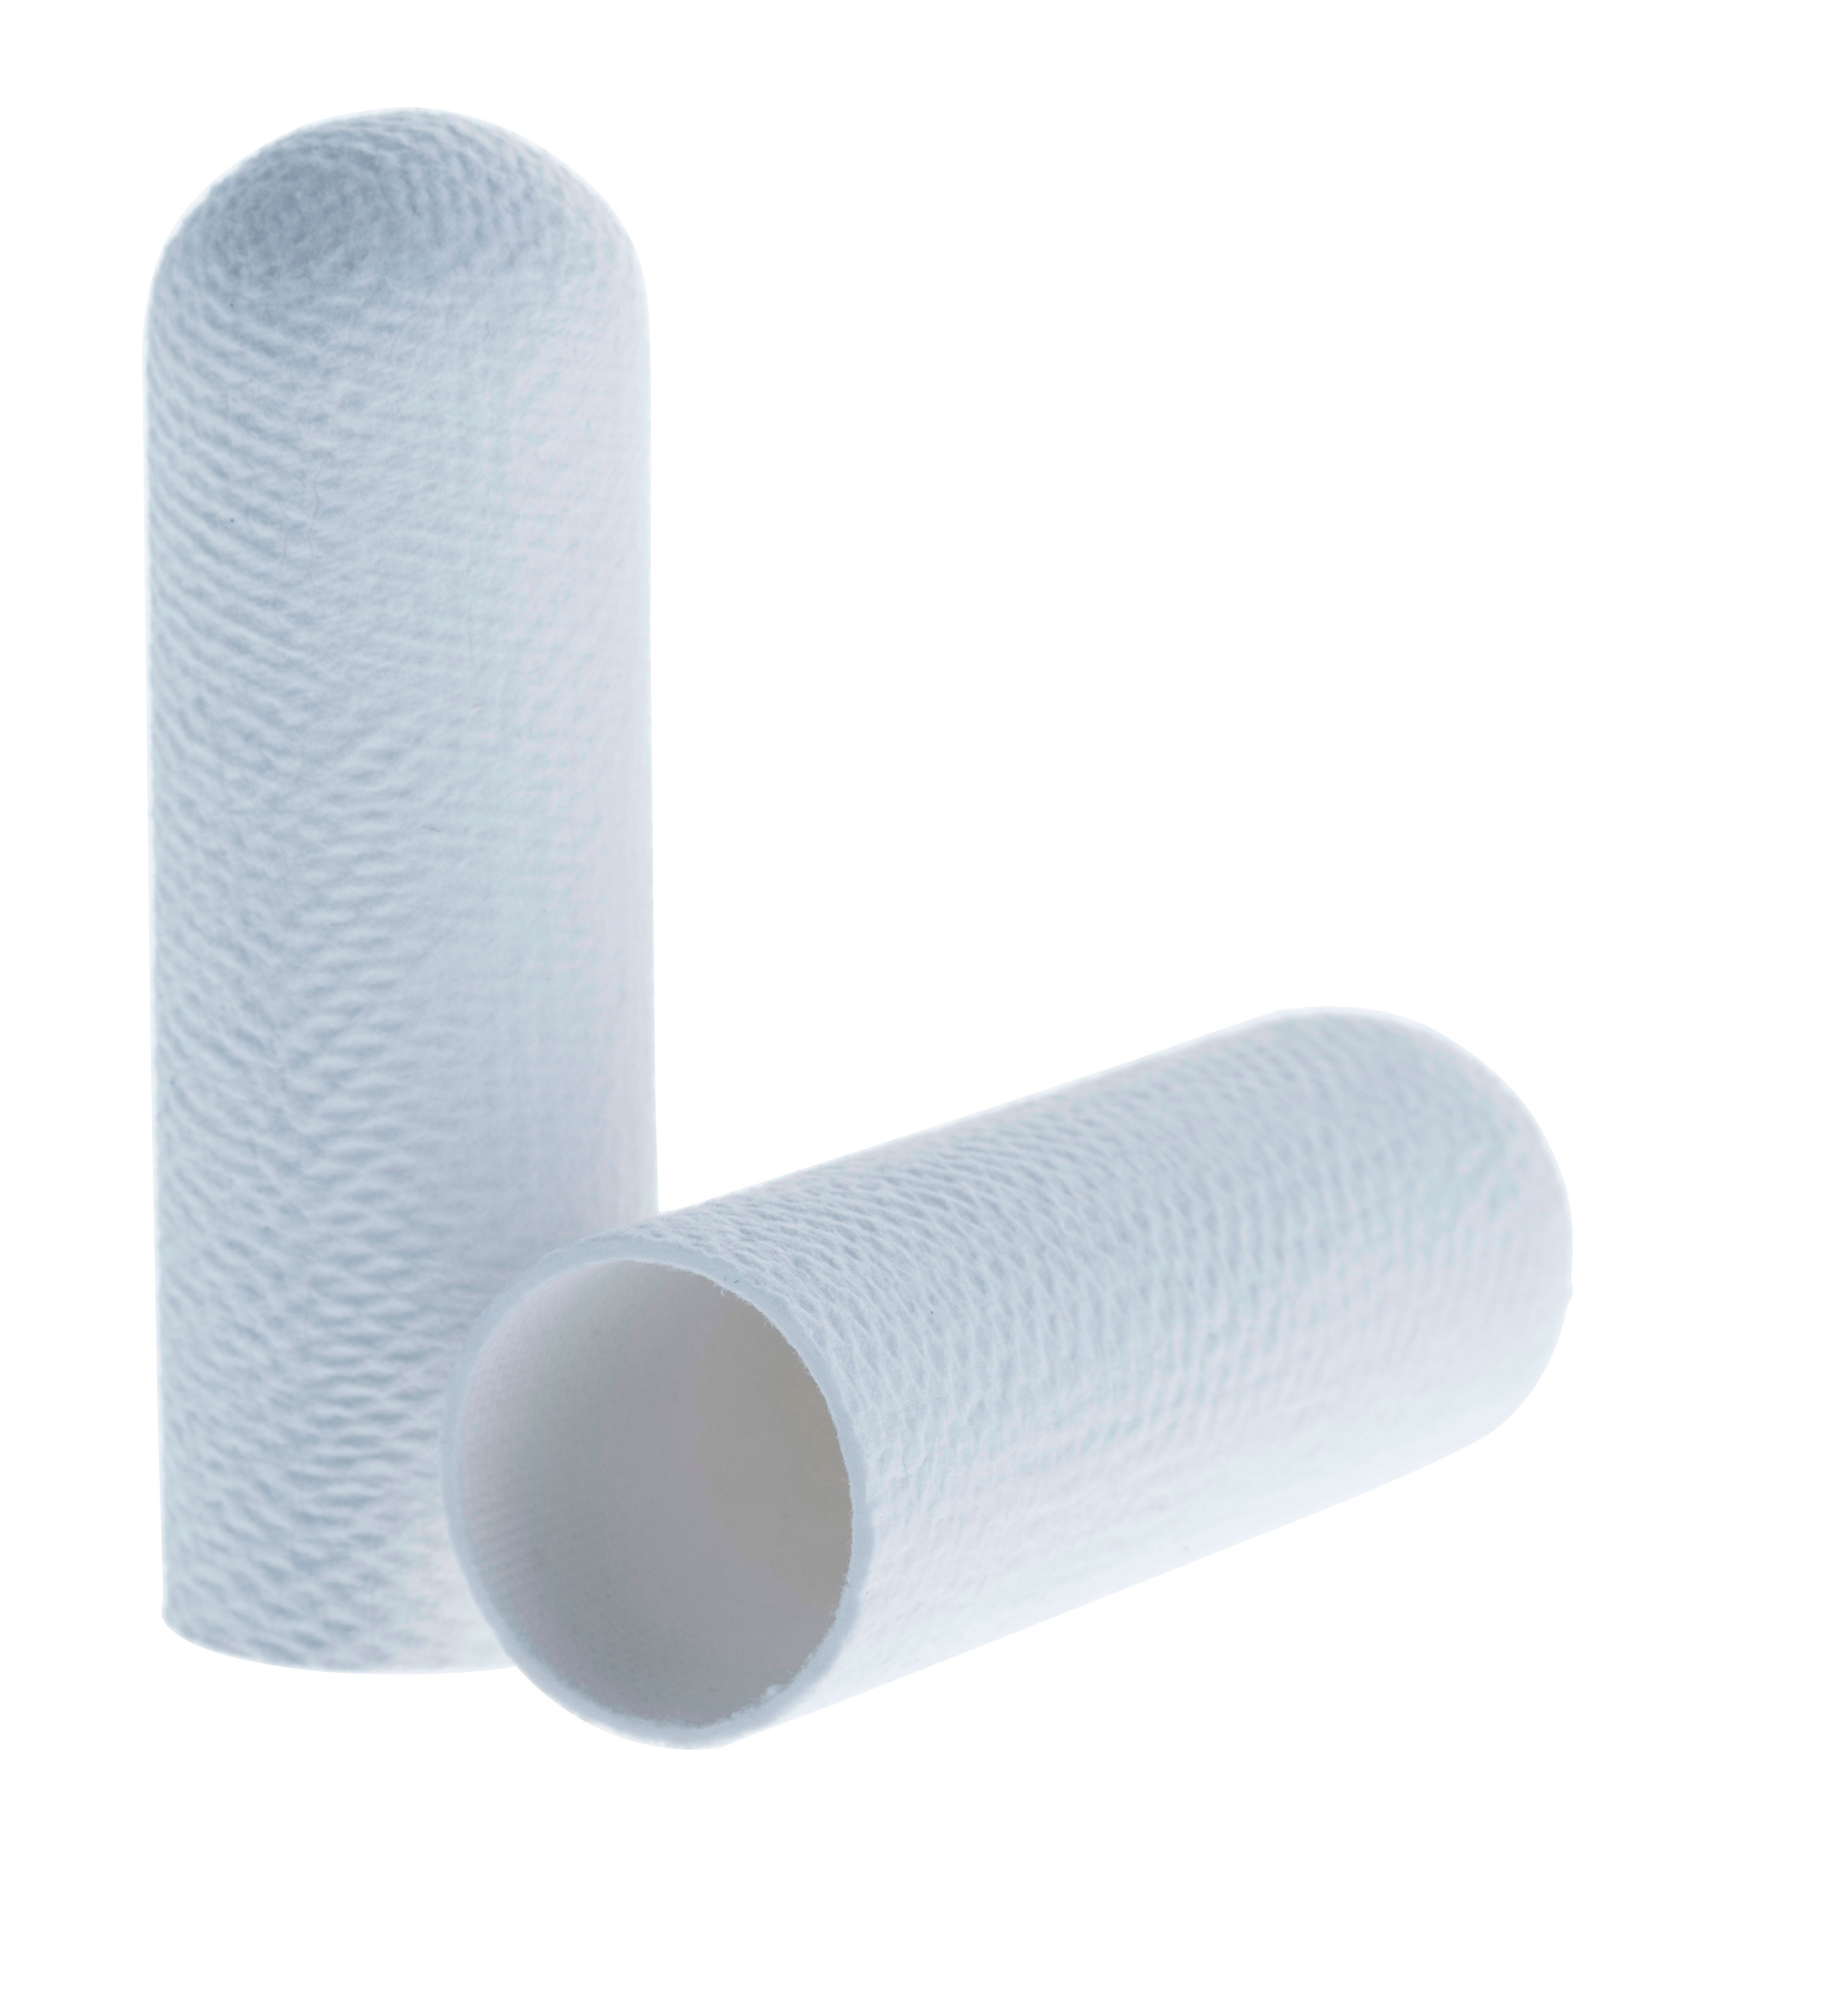 Cellulose extraction thimbles for Soxhlet extraction. SCHARLAU. Standard cellulose cartridge. Dim. Øxlength: 28x120mm. Particle retention in liquid: Nom. 8-15 microns